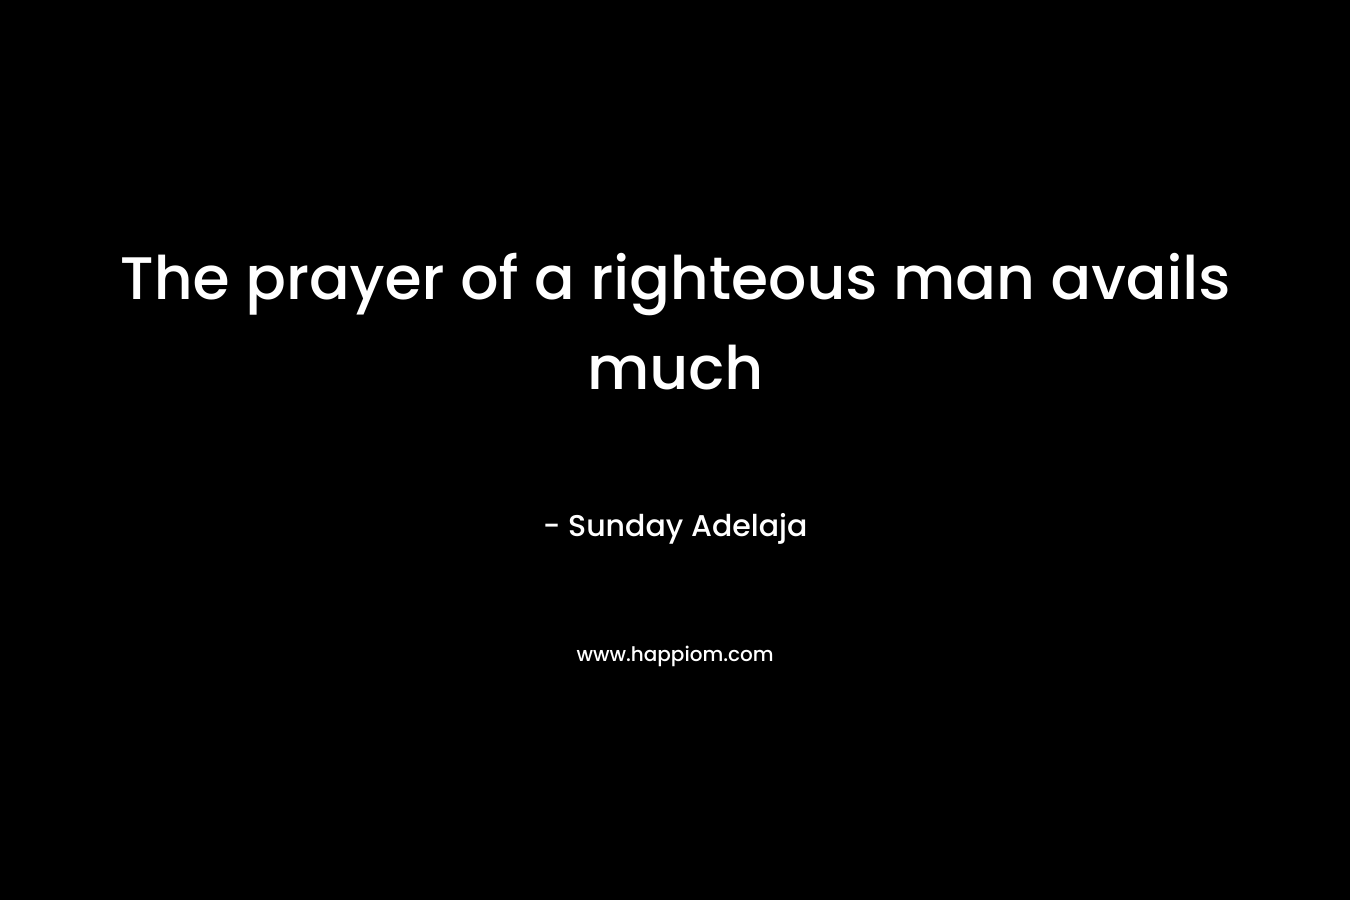 The prayer of a righteous man avails much